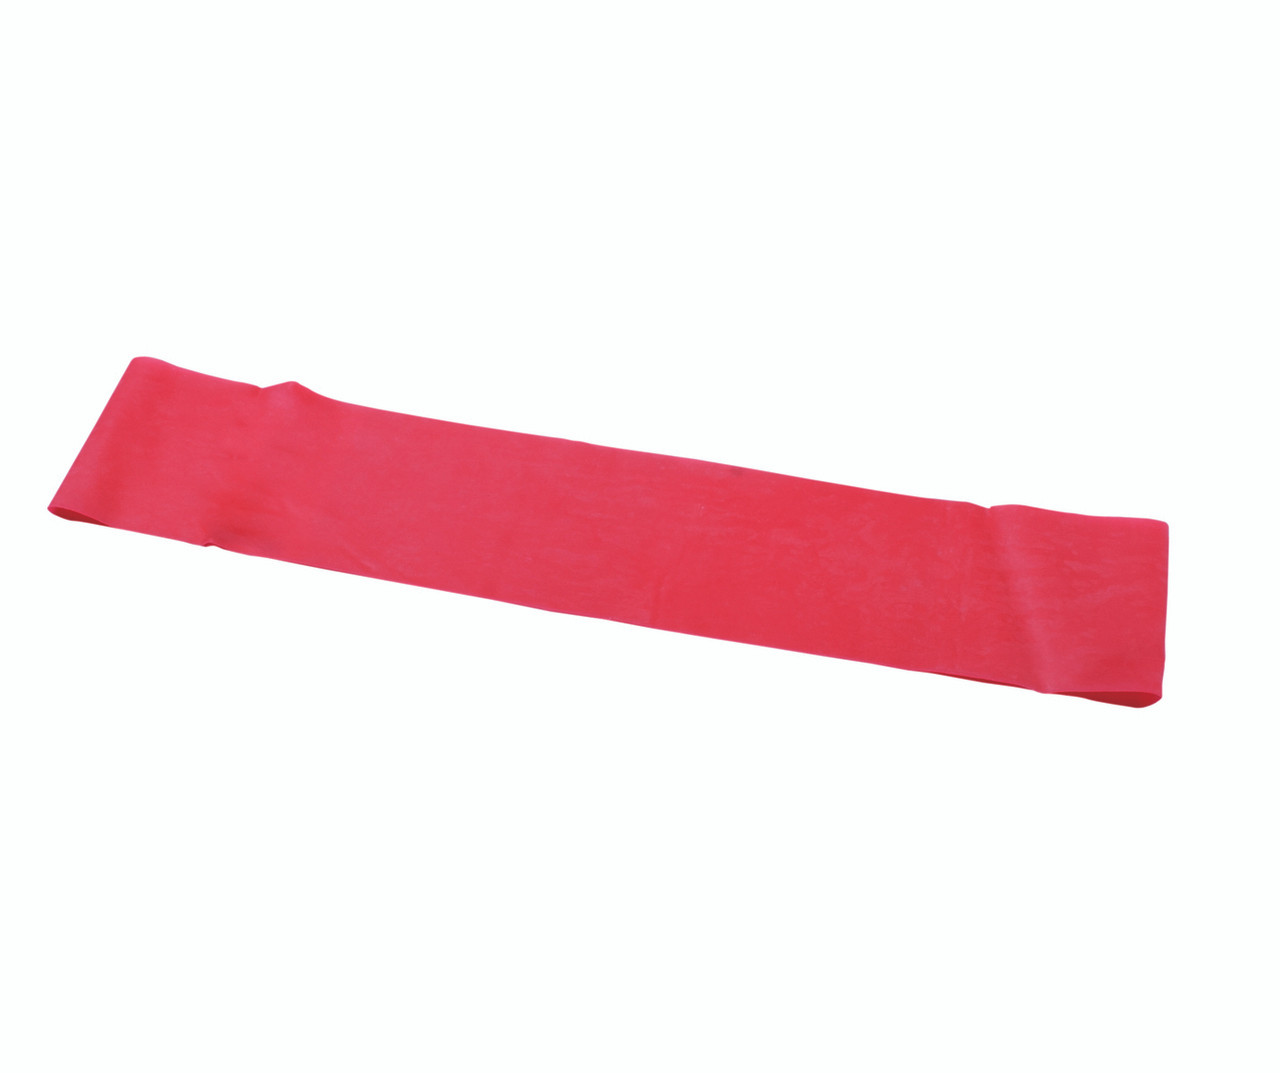 CanDo¨ Band Exercise Loop - 15" Long - Red - light, 10 each